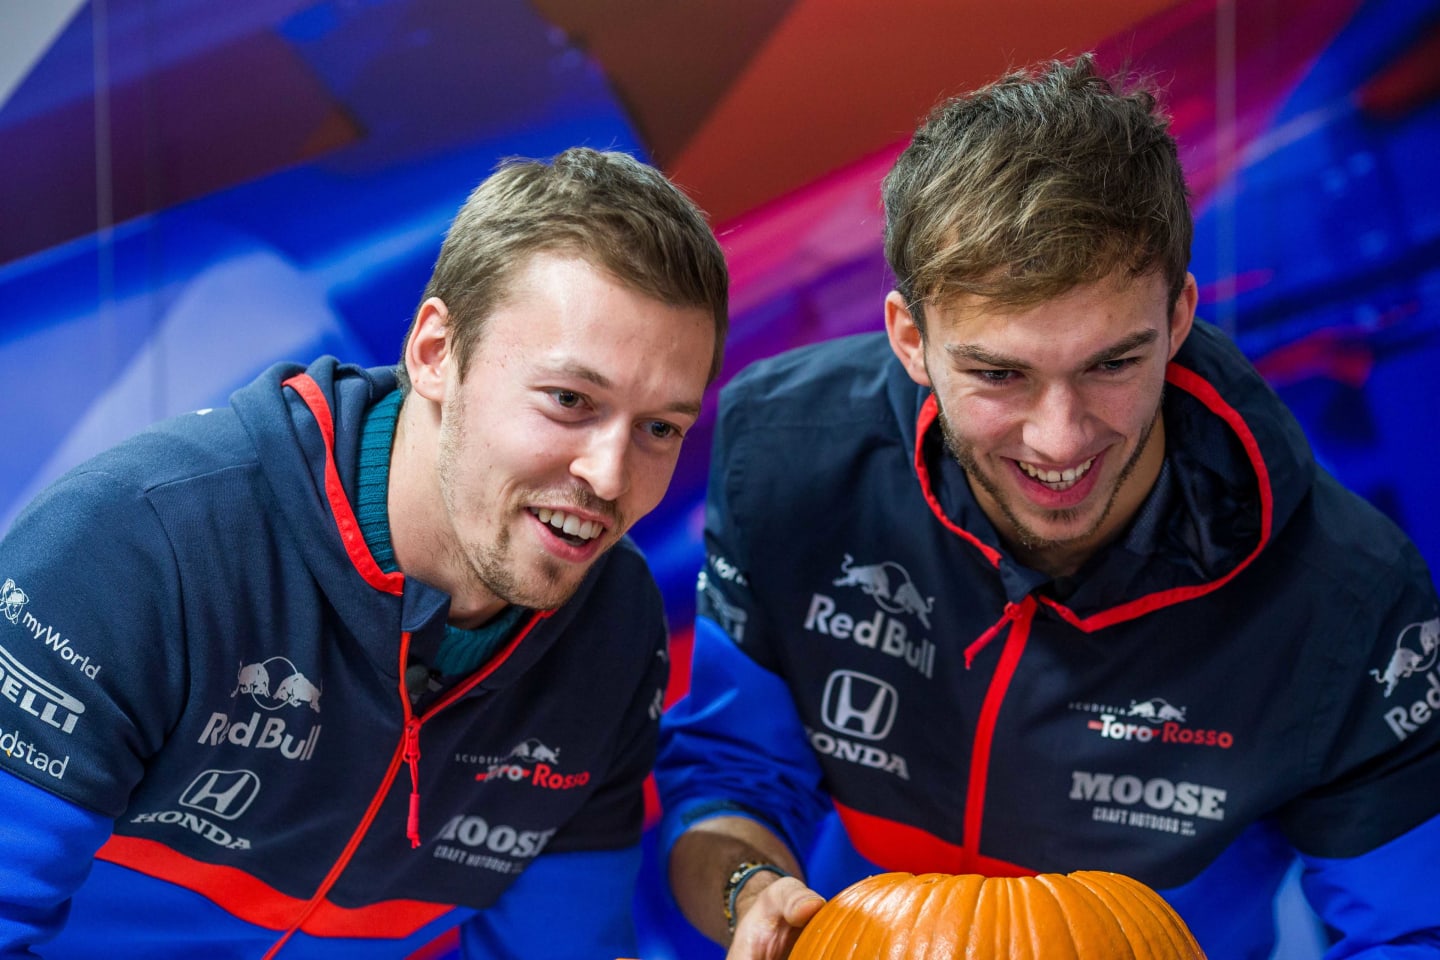 AUSTIN, TEXAS - OCTOBER 31: Daniil Kvyat of Scuderia Toro Rosso and Russia and Pierre Gasly of